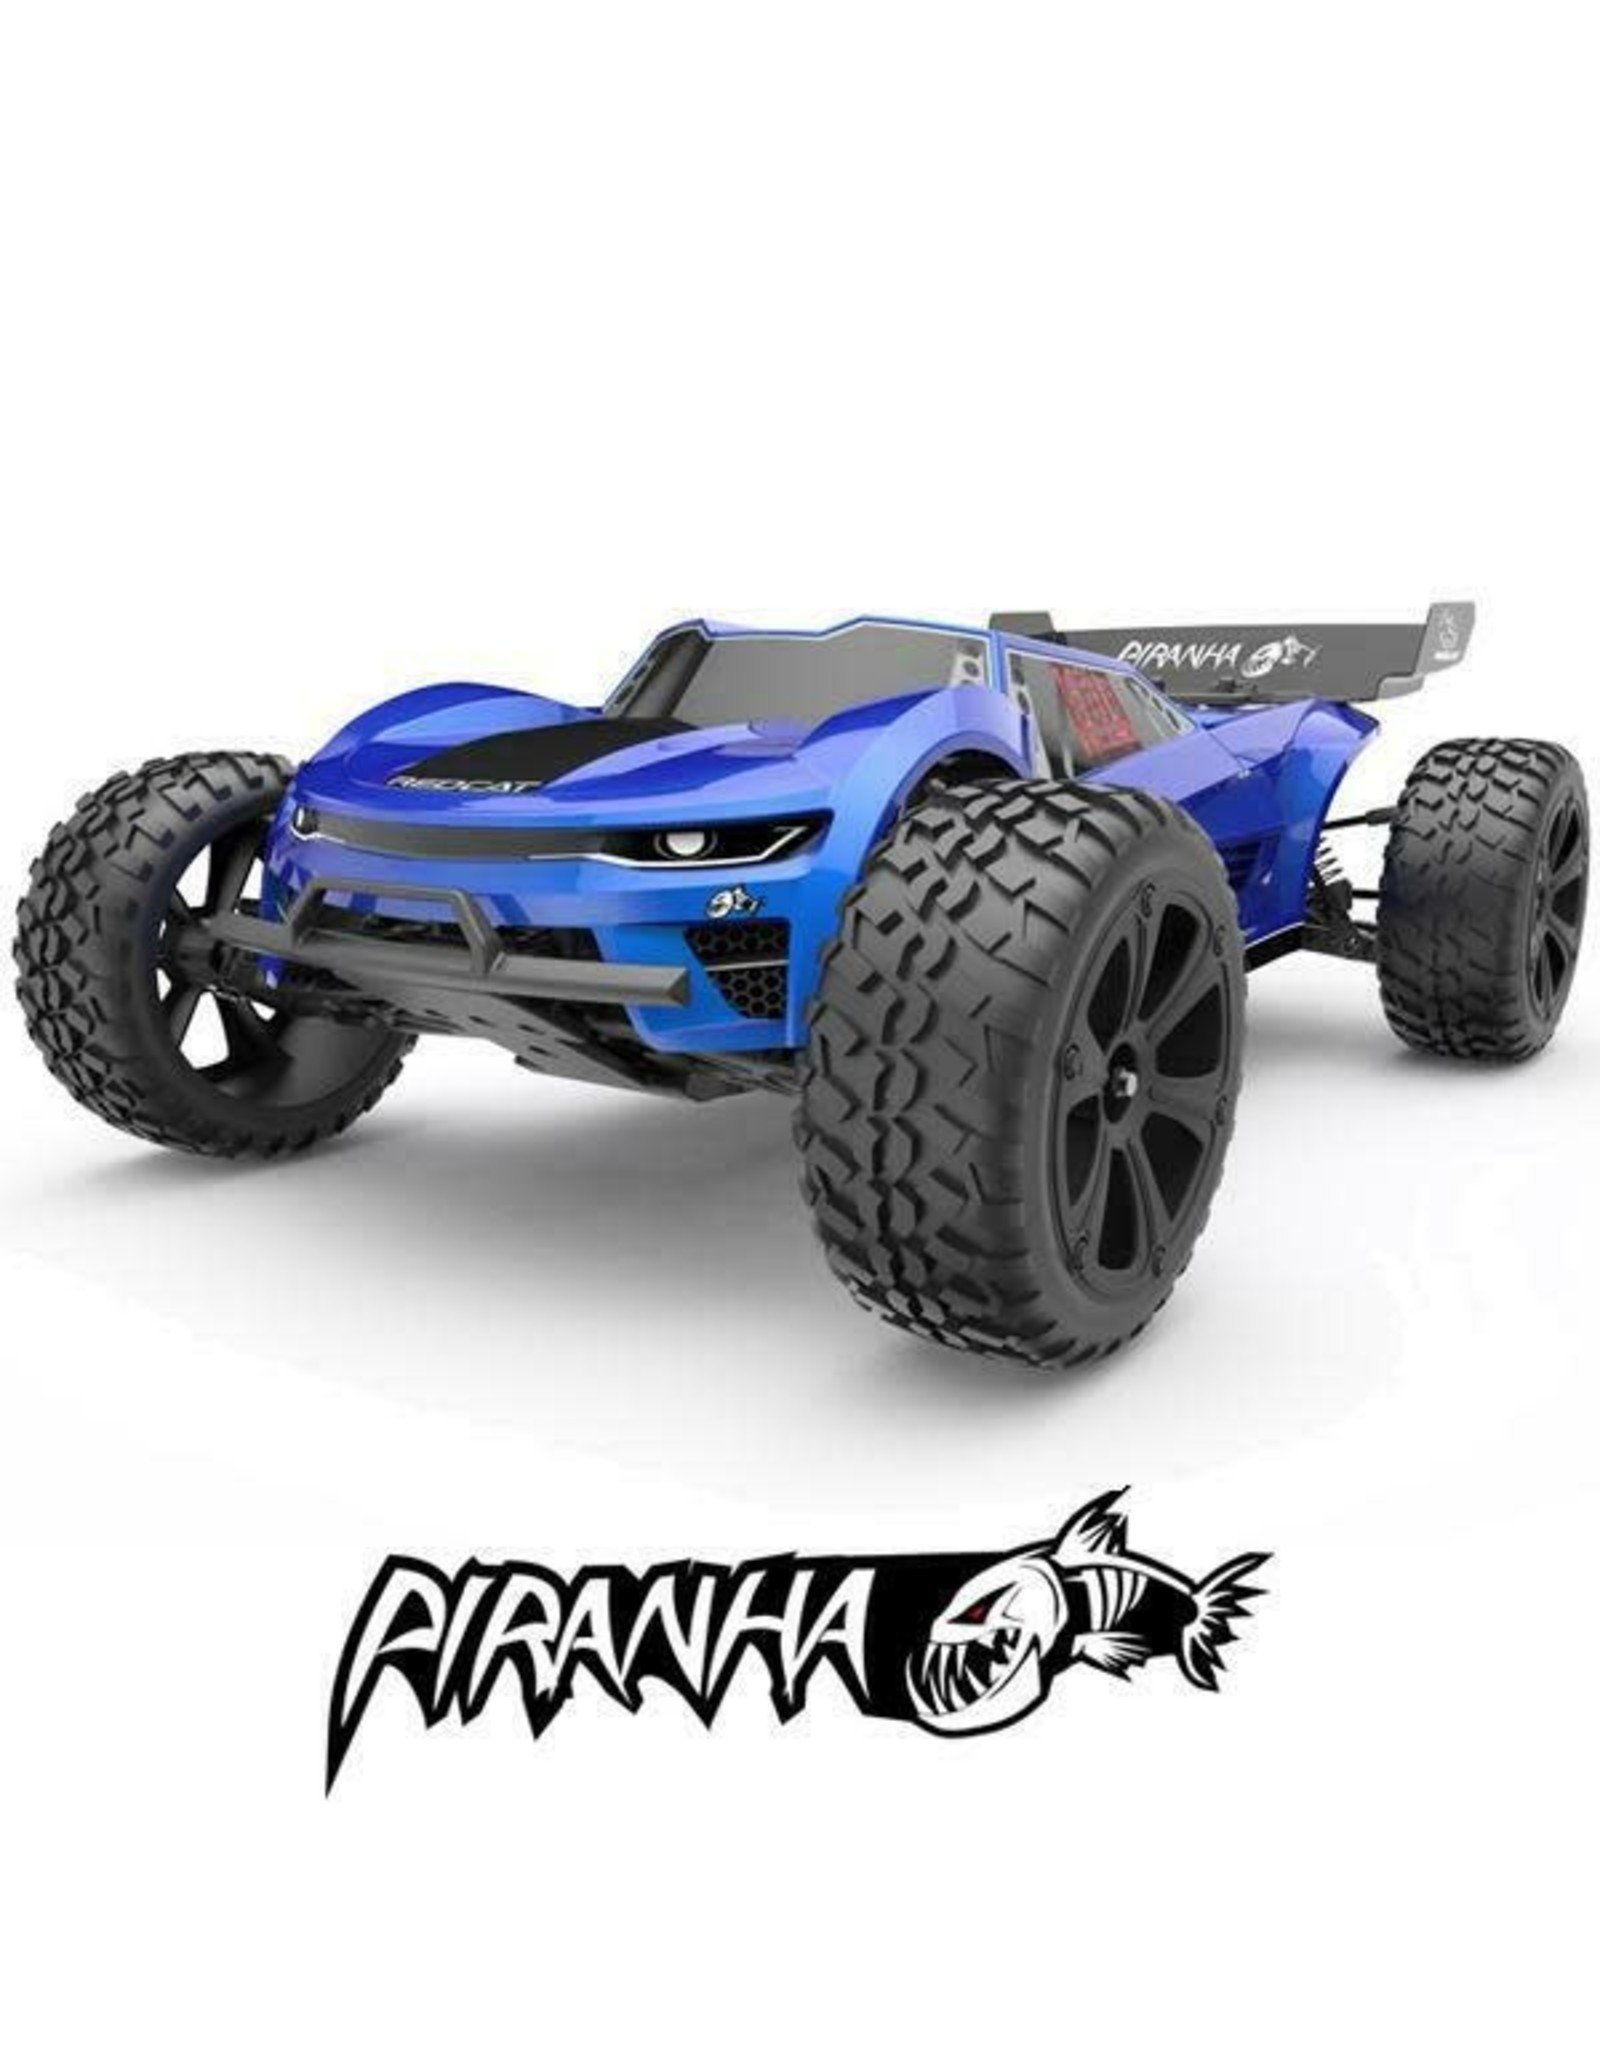 Redcat Racing Piranha TR10 1/10 Scale Brushed Electric Truggy - Includes: 2.4Ghz Radio, Battery, Charger, Ready to Run